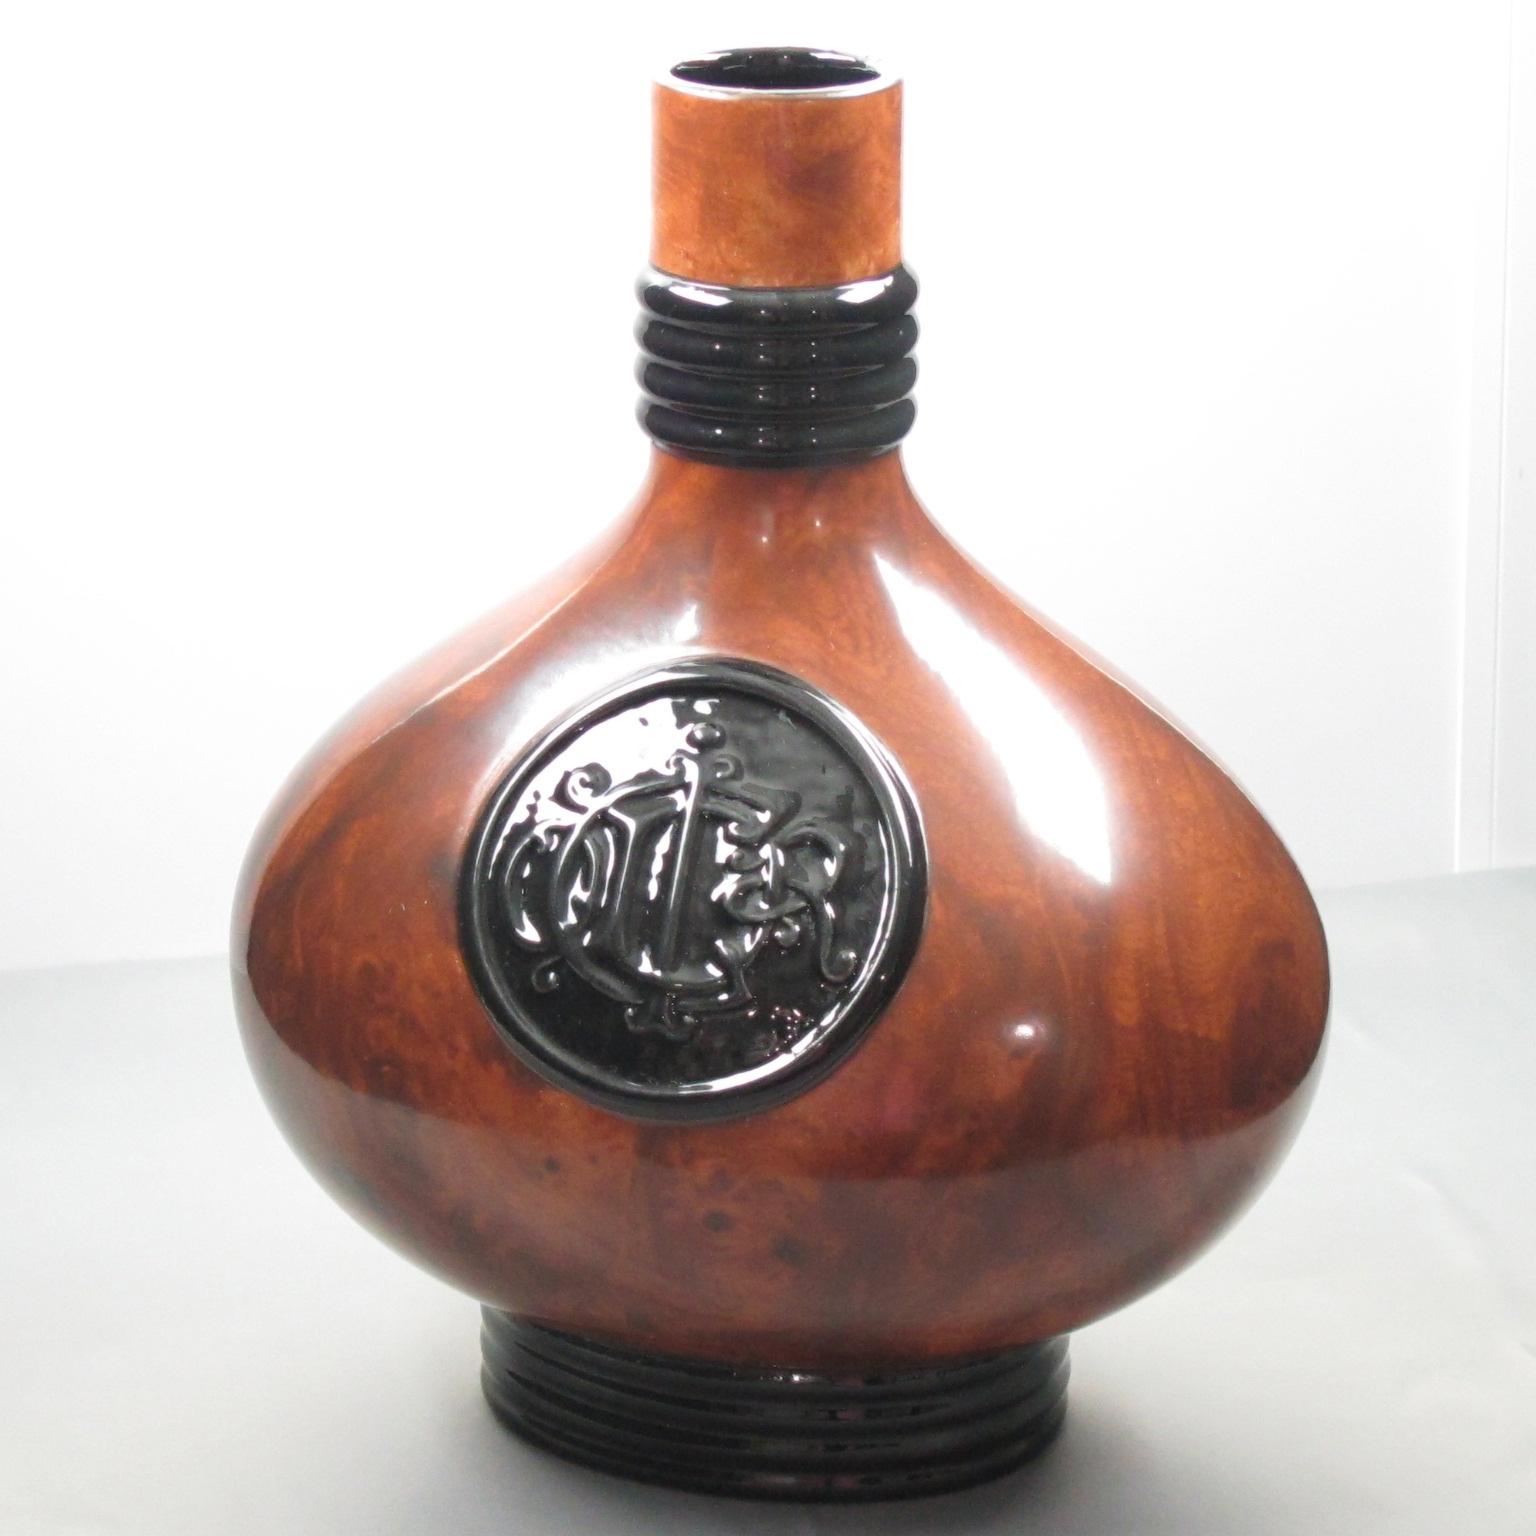 This stunning Christian Dior Paris Amphora ceramic vase from the 1980s is a beautiful accent piece for any room. The glossy ceramic has a unique faux burl wood textured pattern with black detailing and is finished with an ornate large 